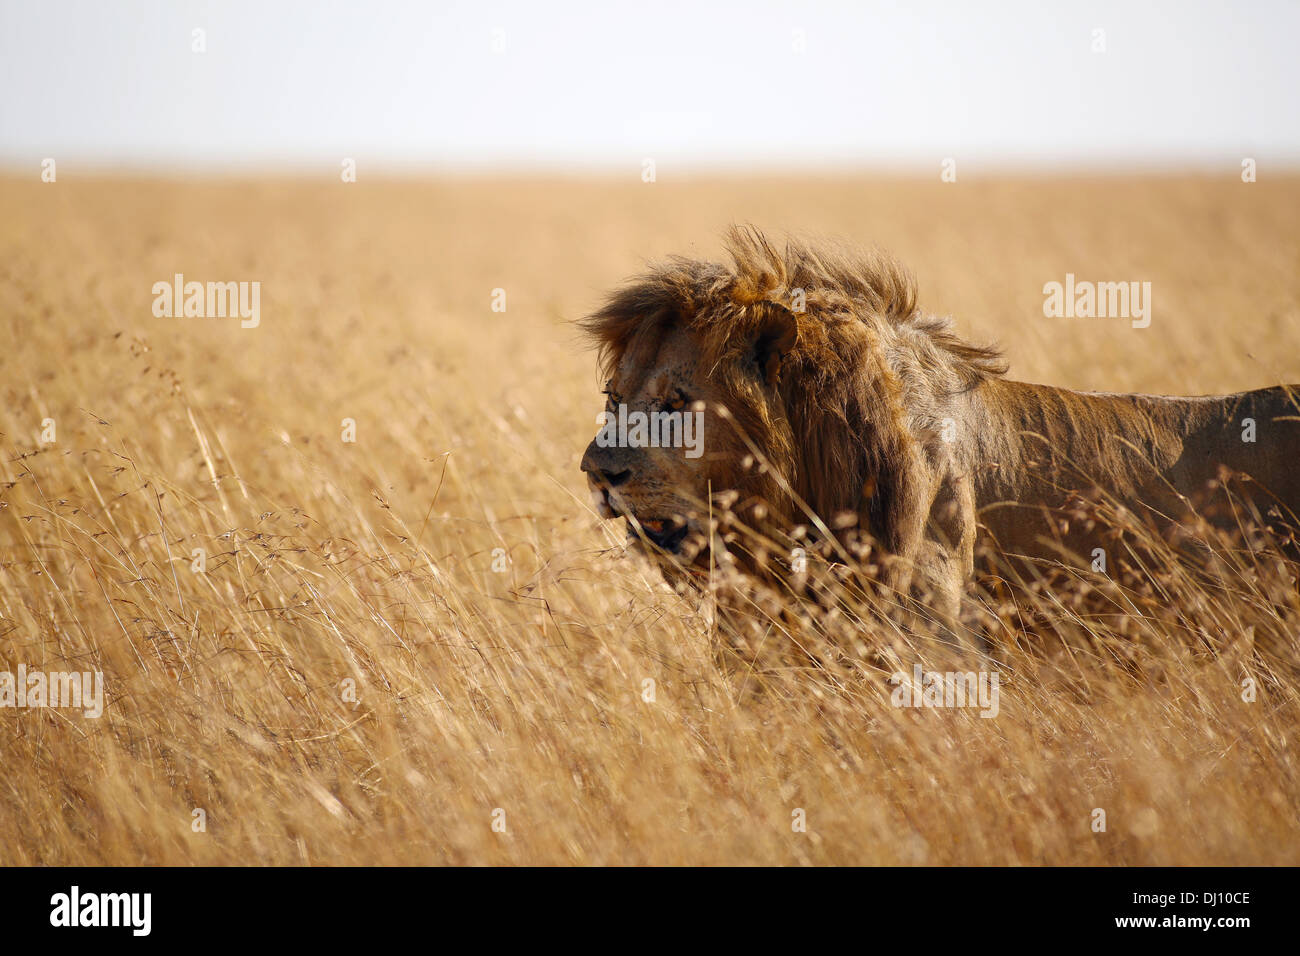 A scarred lion walking in the middle of tall dry grass in the Maasai Mara plains, Kenya Stock Photo